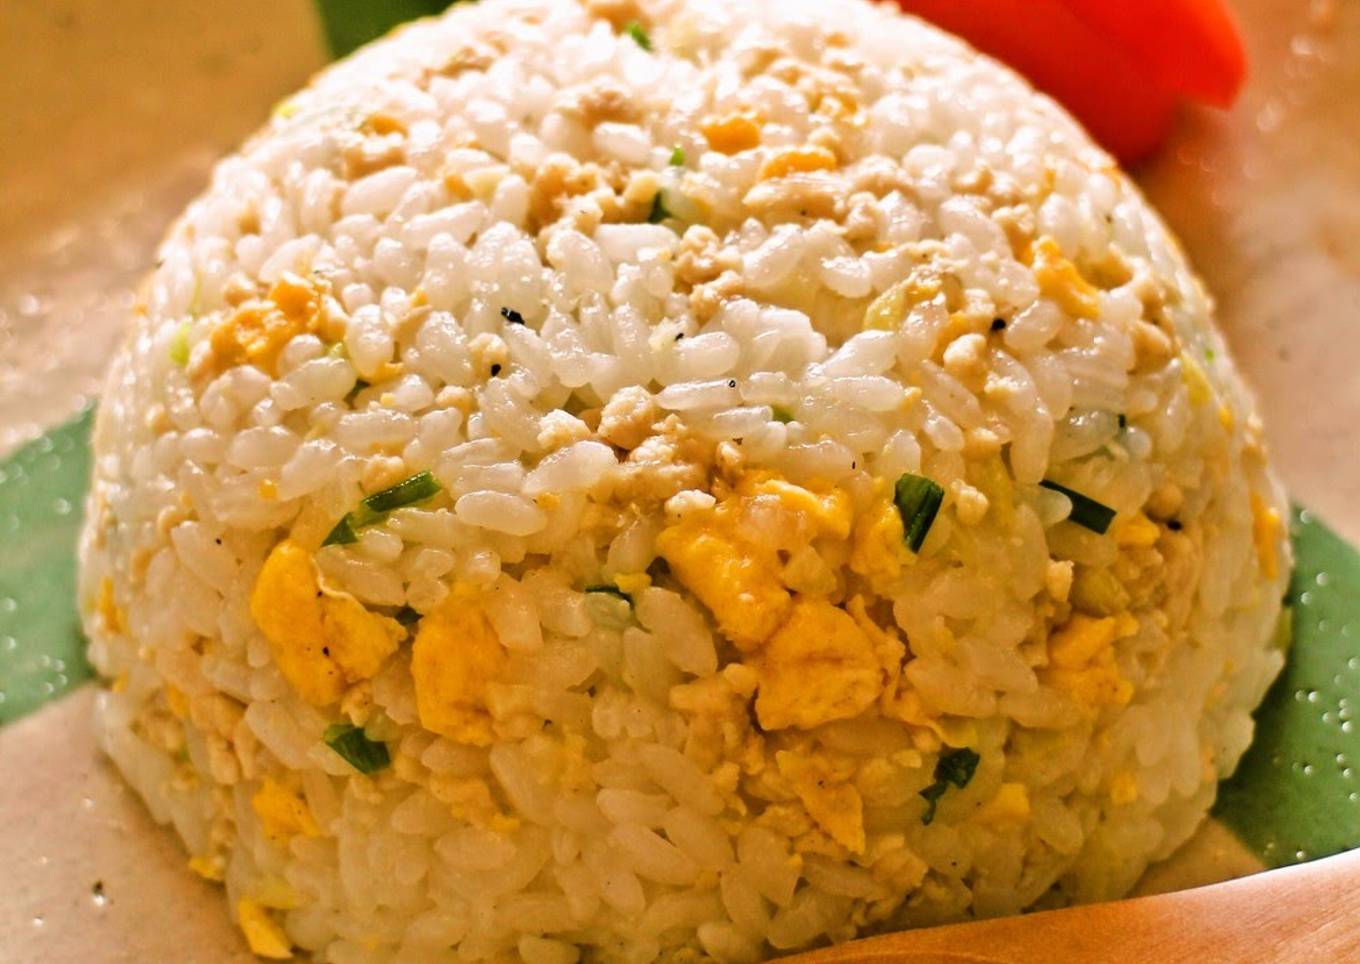 Great to have in stock. A flavorful base of homemade fried rice